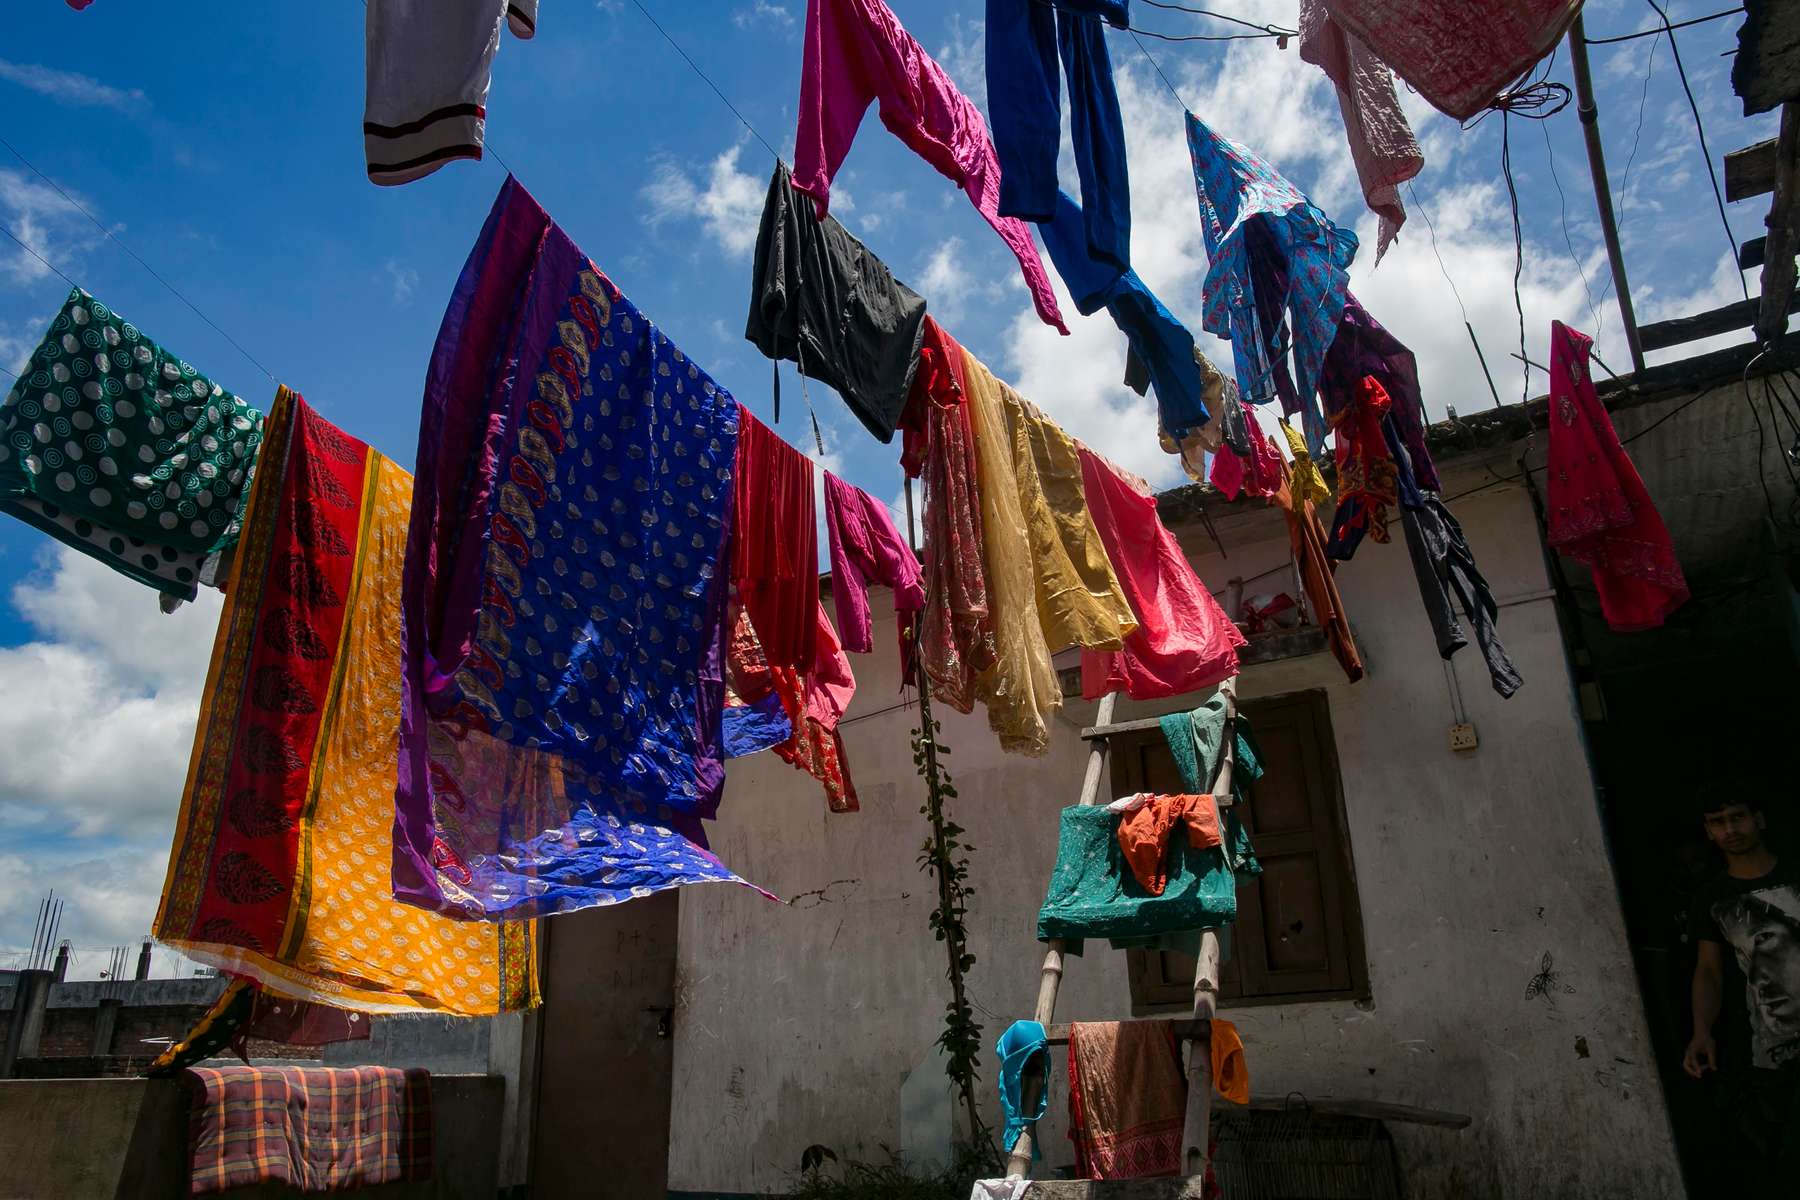 Laundry hangs on the roof of the Mymensingh brothel